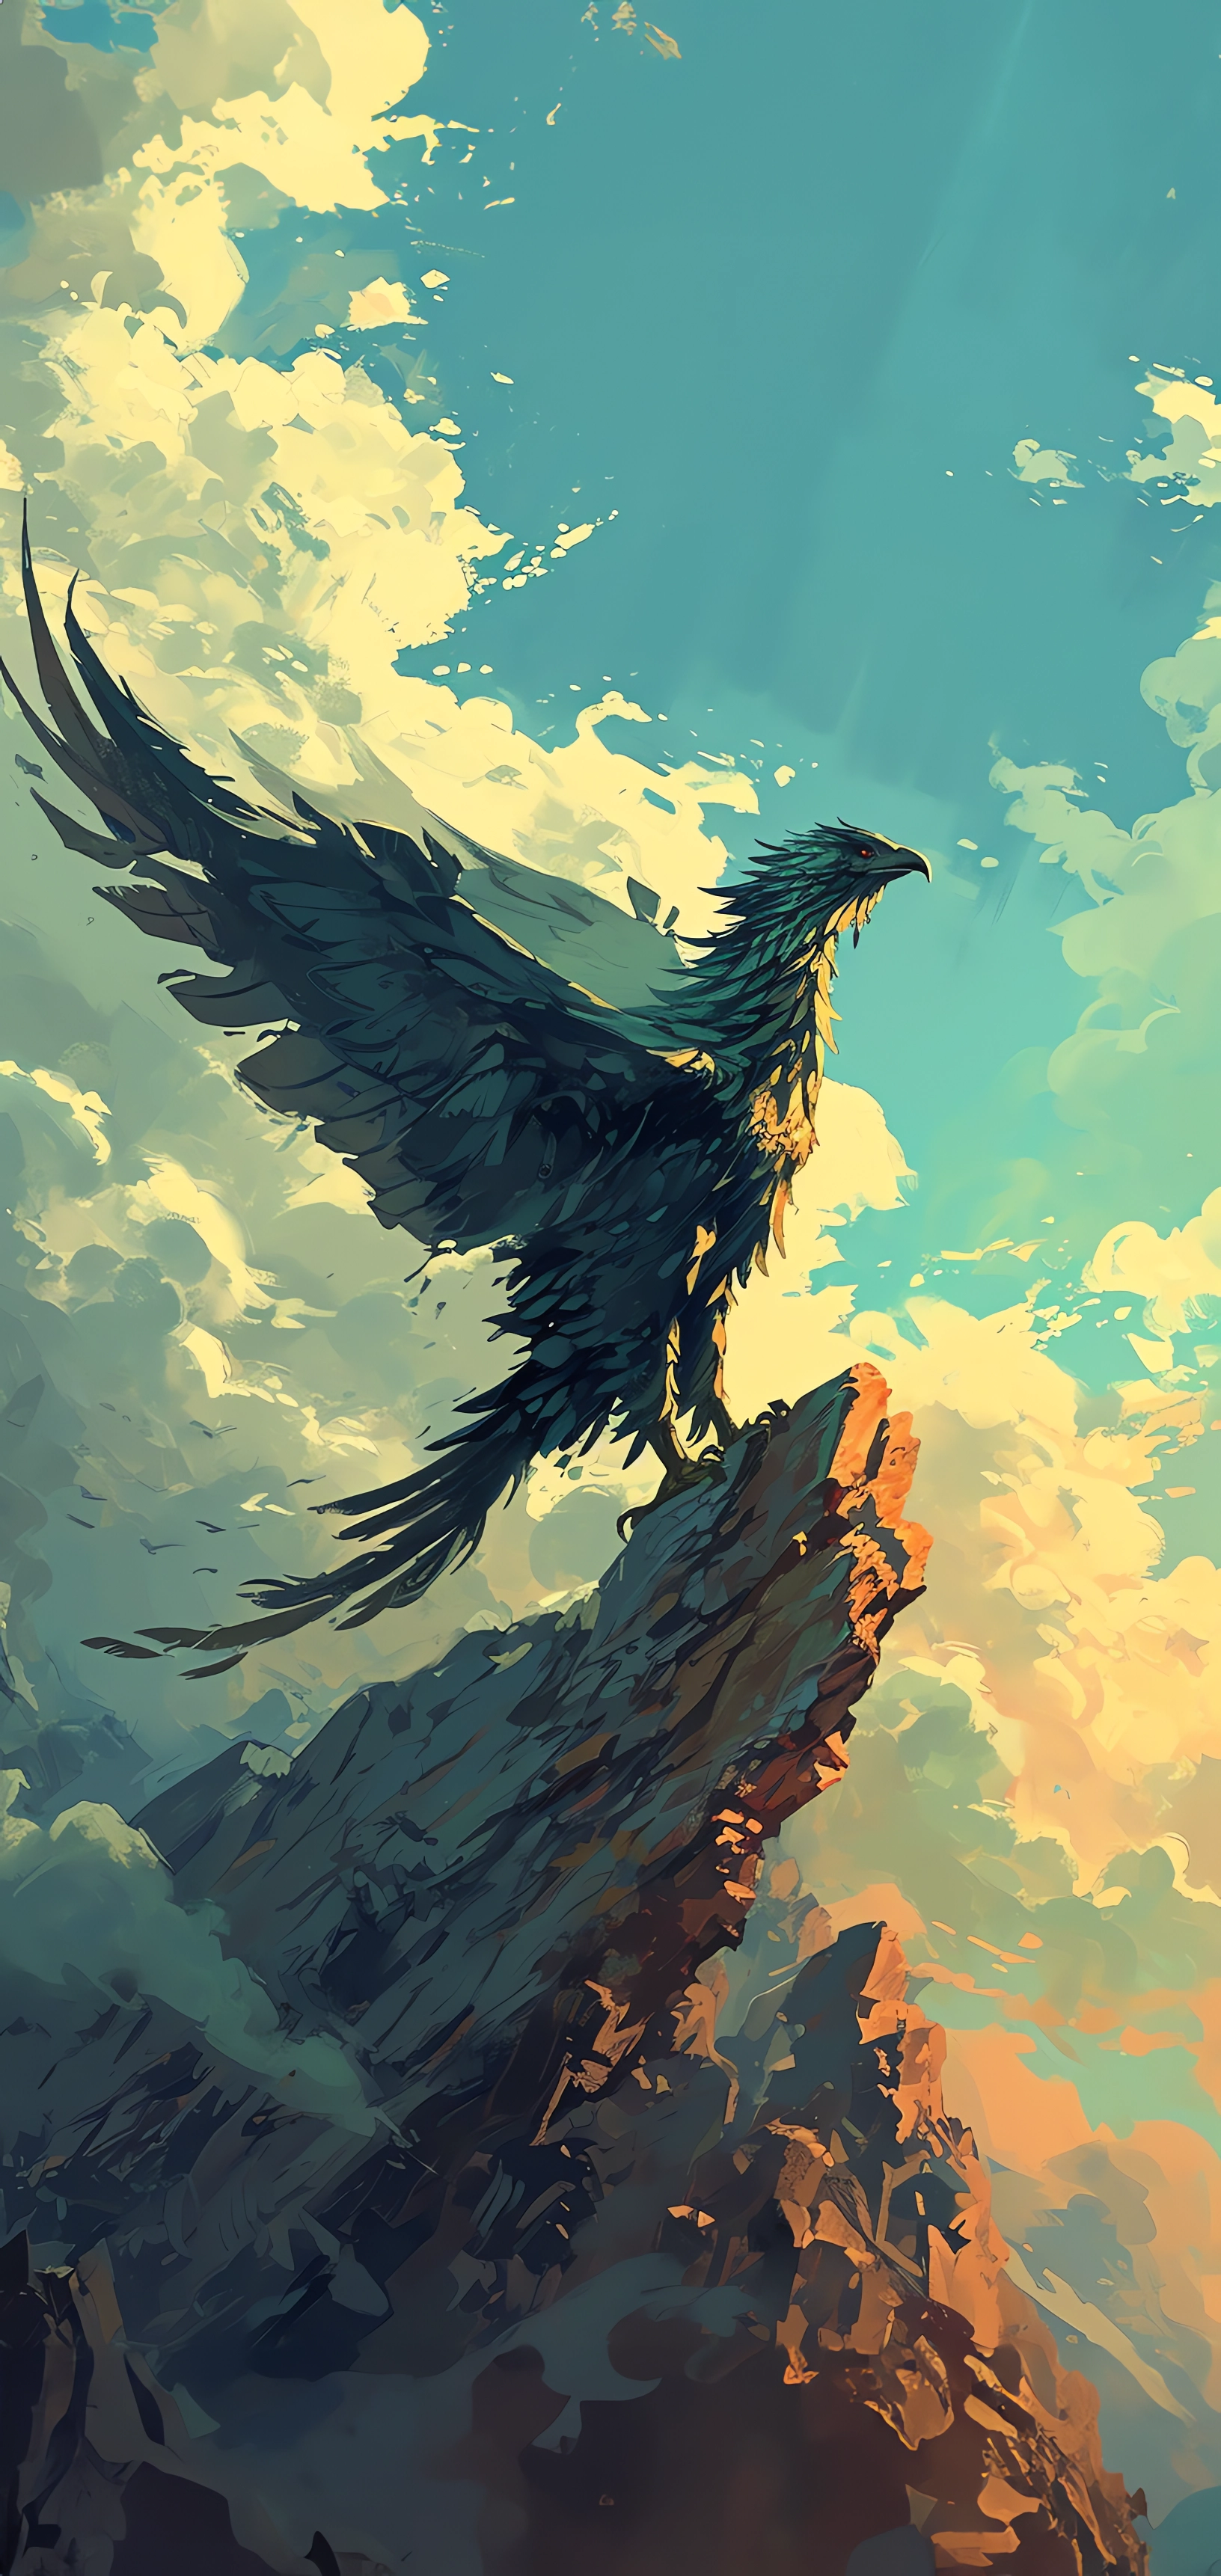 Impressive iPhone wallpaper of a majestic eagle ascending from a rugged cliff against a backdrop of golden clouds.